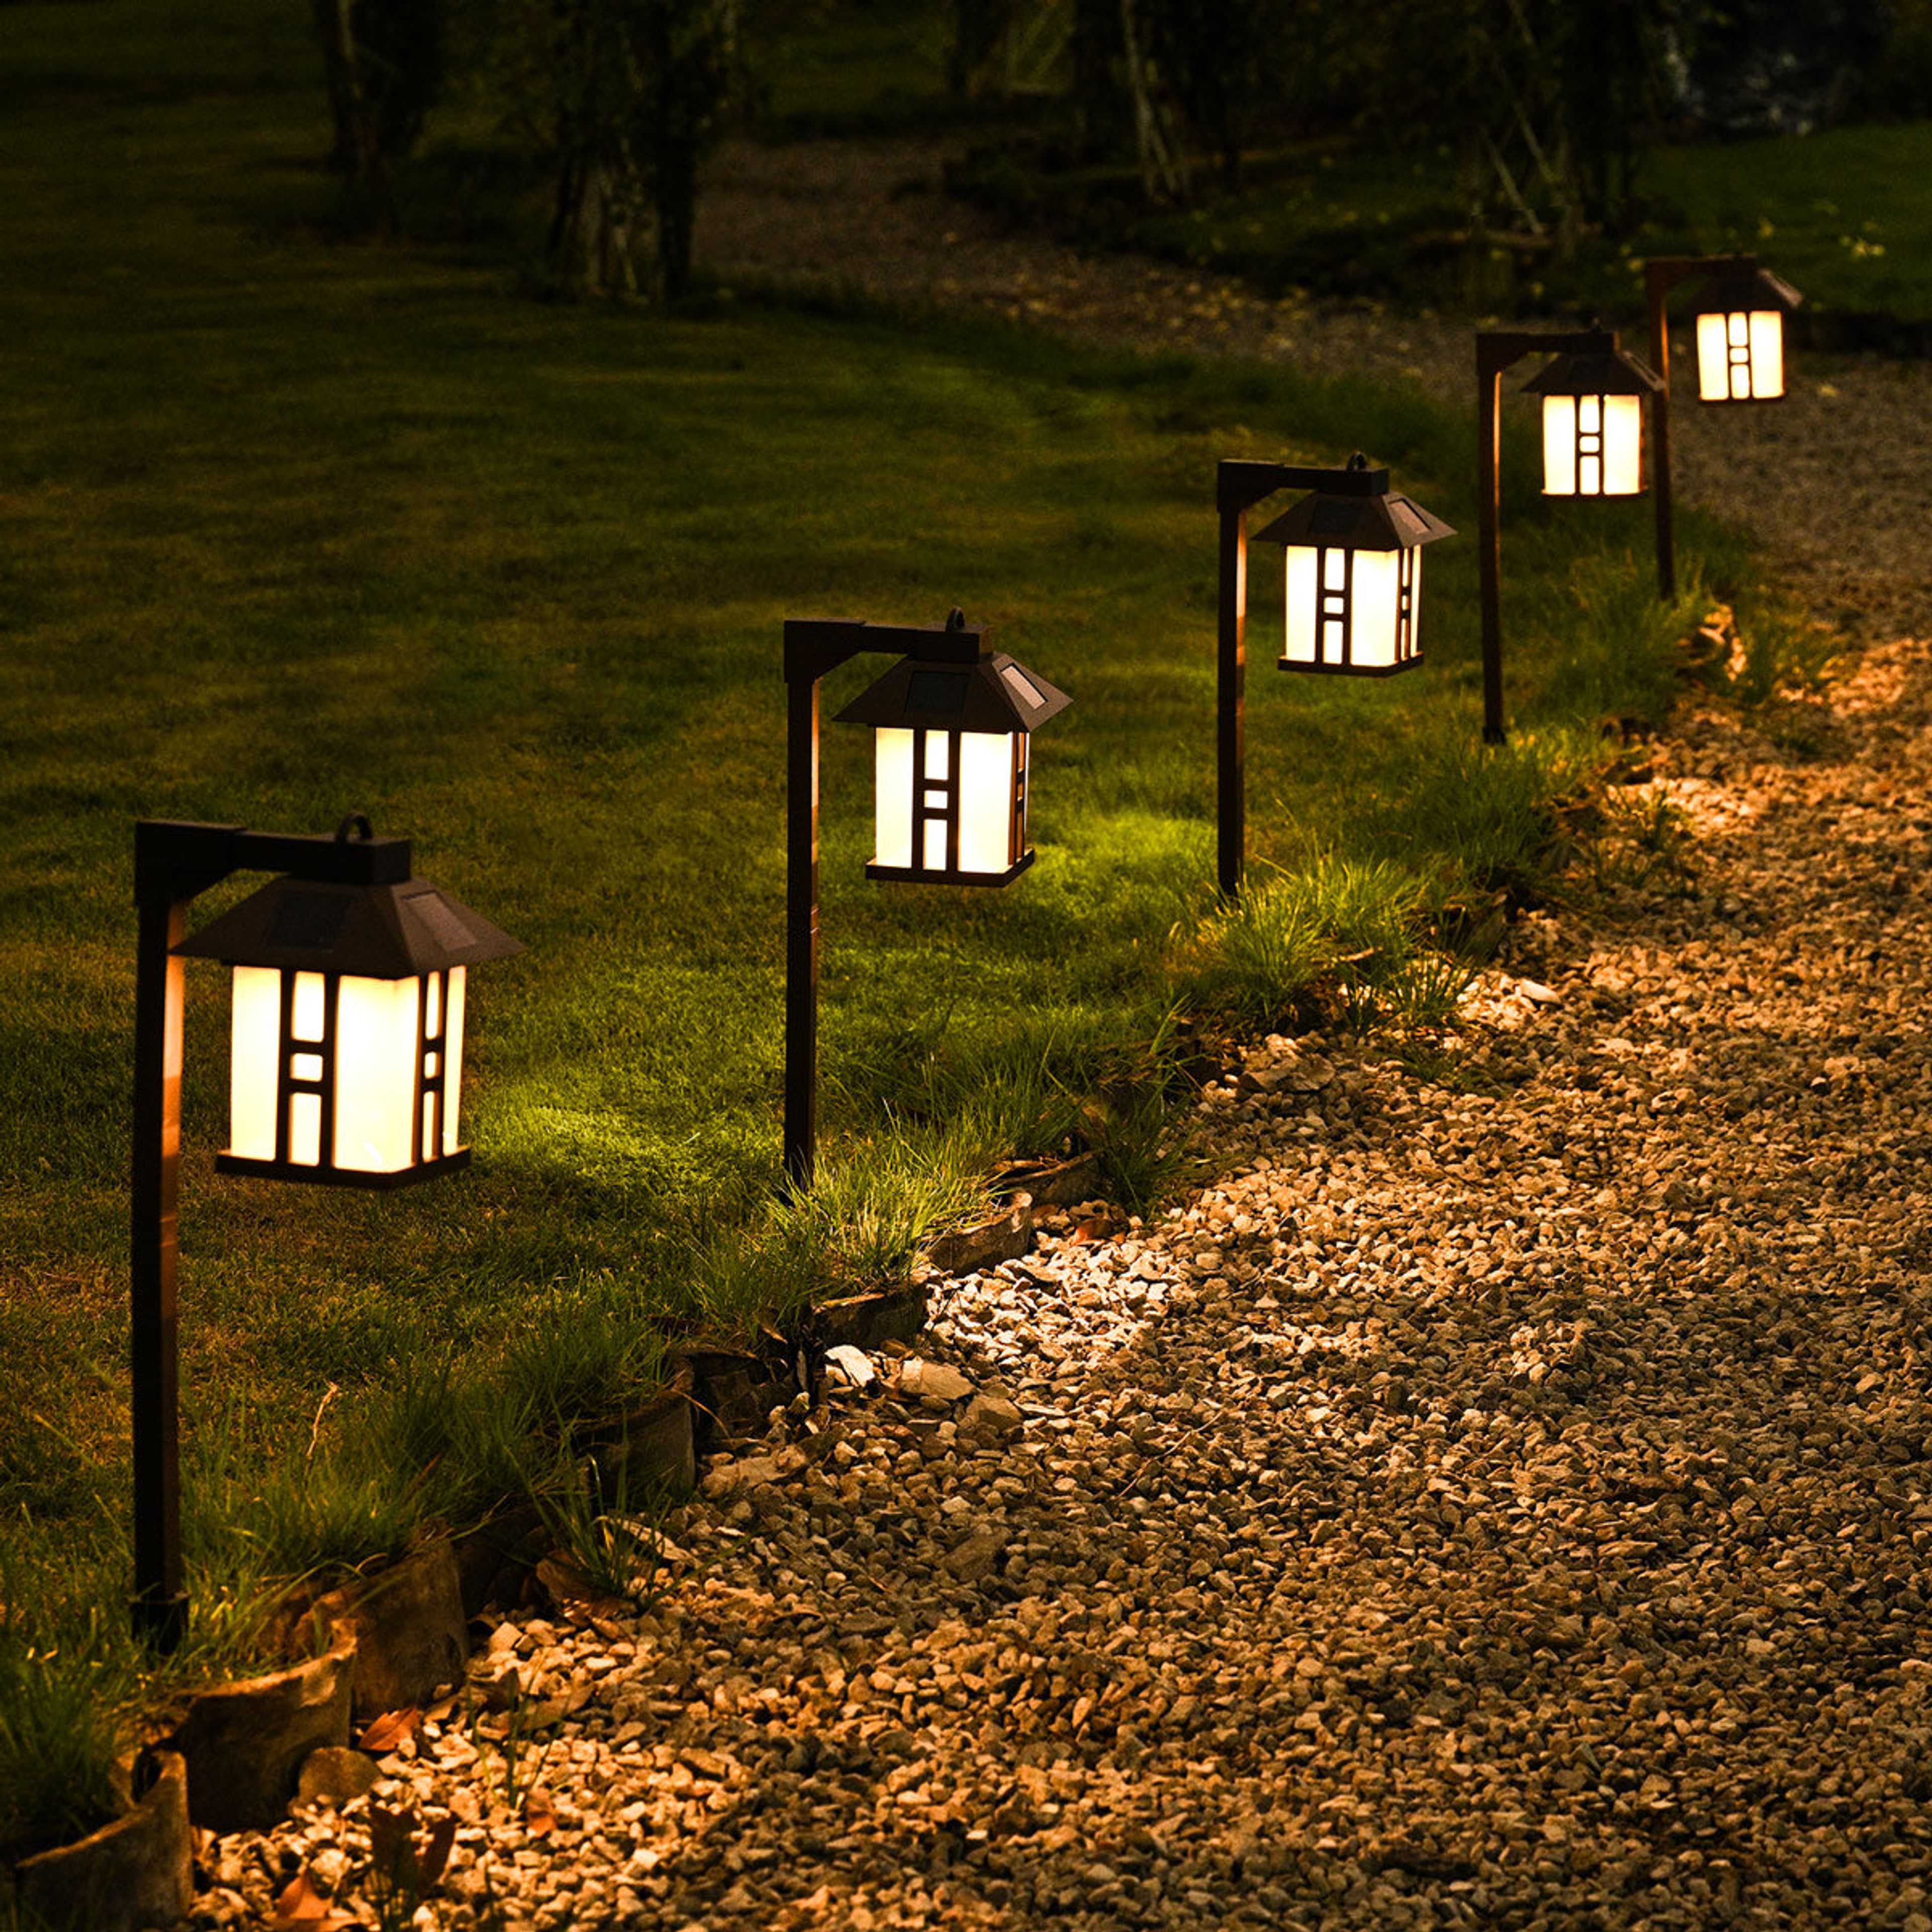 Gigalumi Solar Square Sconce Walkway Lights Set (4 Pack)